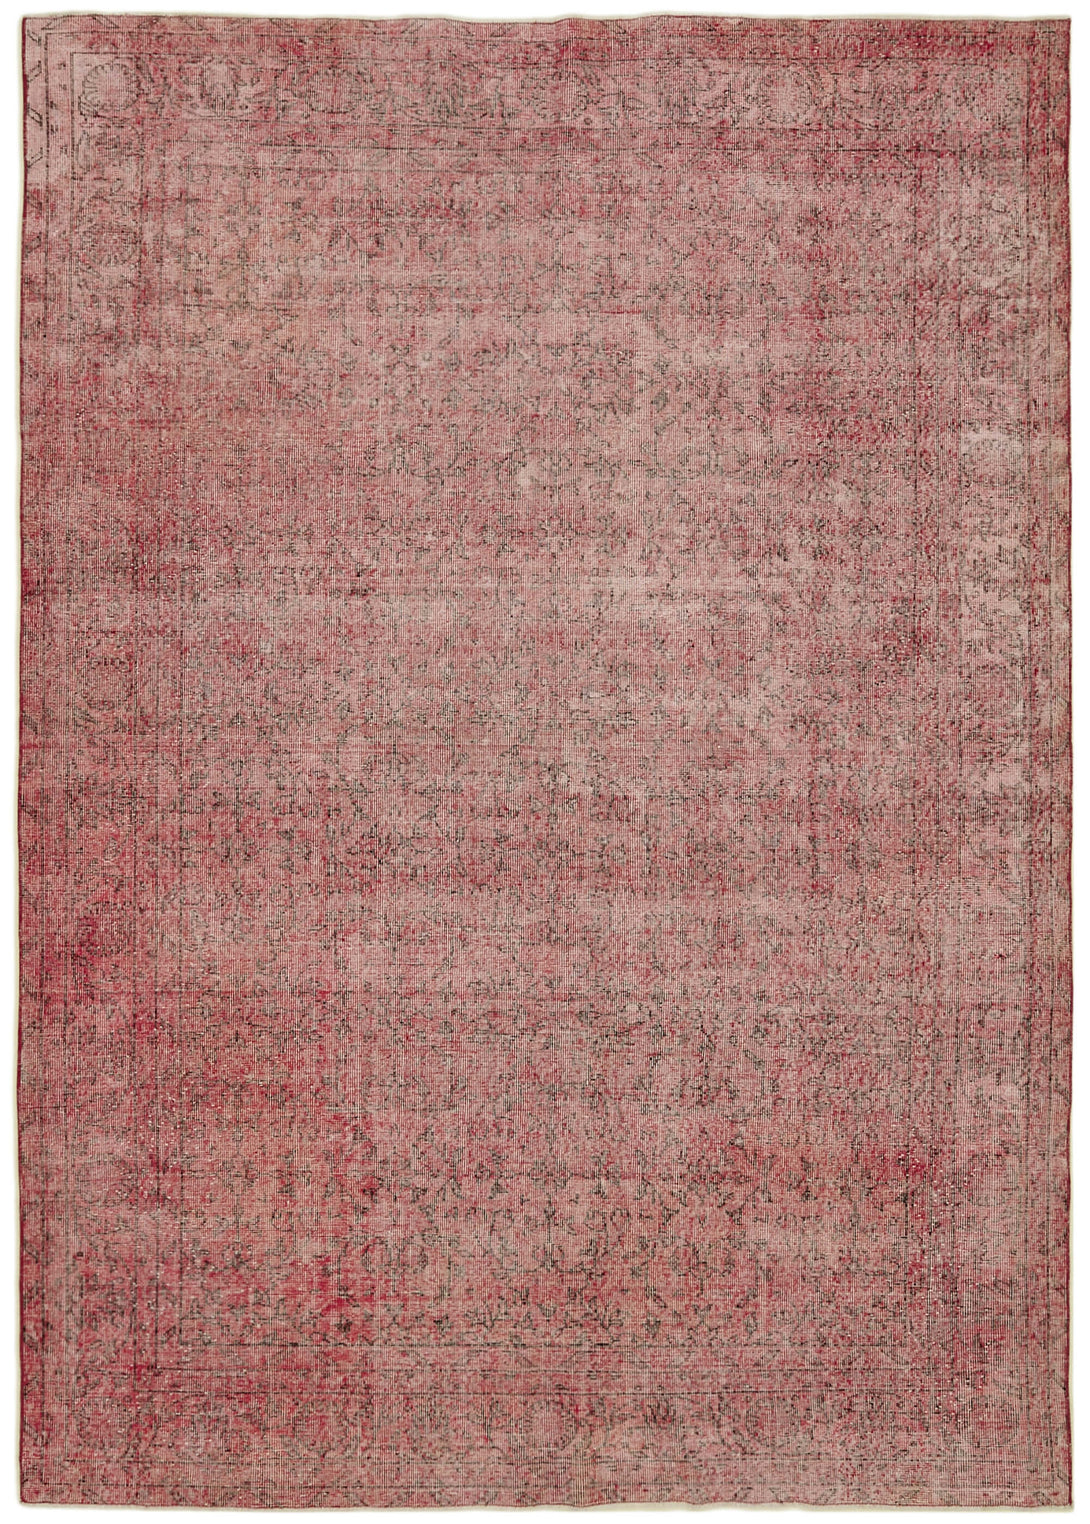 Handmade Overdyed Area Rug > Design# OL-AC-41221 > Size: 7'-4" x 10'-3", Carpet Culture Rugs, Handmade Rugs, NYC Rugs, New Rugs, Shop Rugs, Rug Store, Outlet Rugs, SoHo Rugs, Rugs in USA